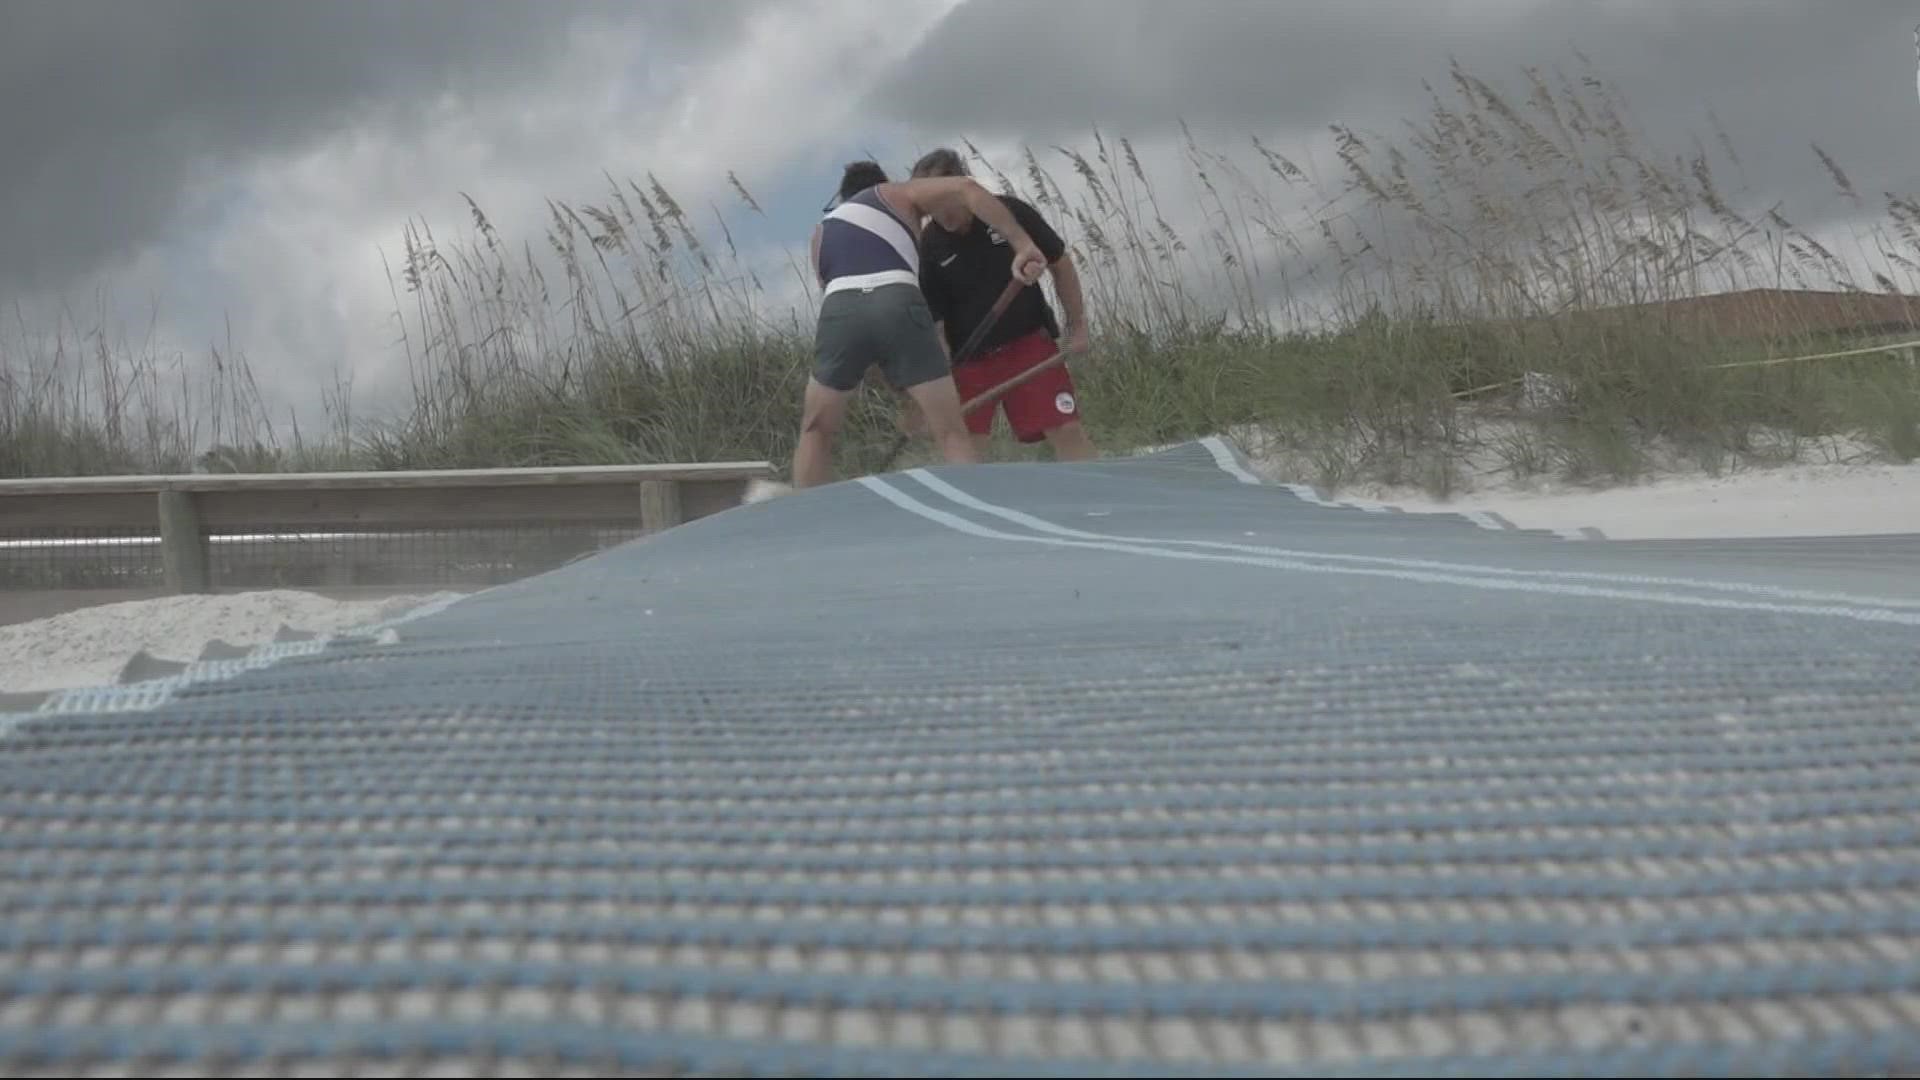 Some with disabilities would like the city to maintain beach access walkways.